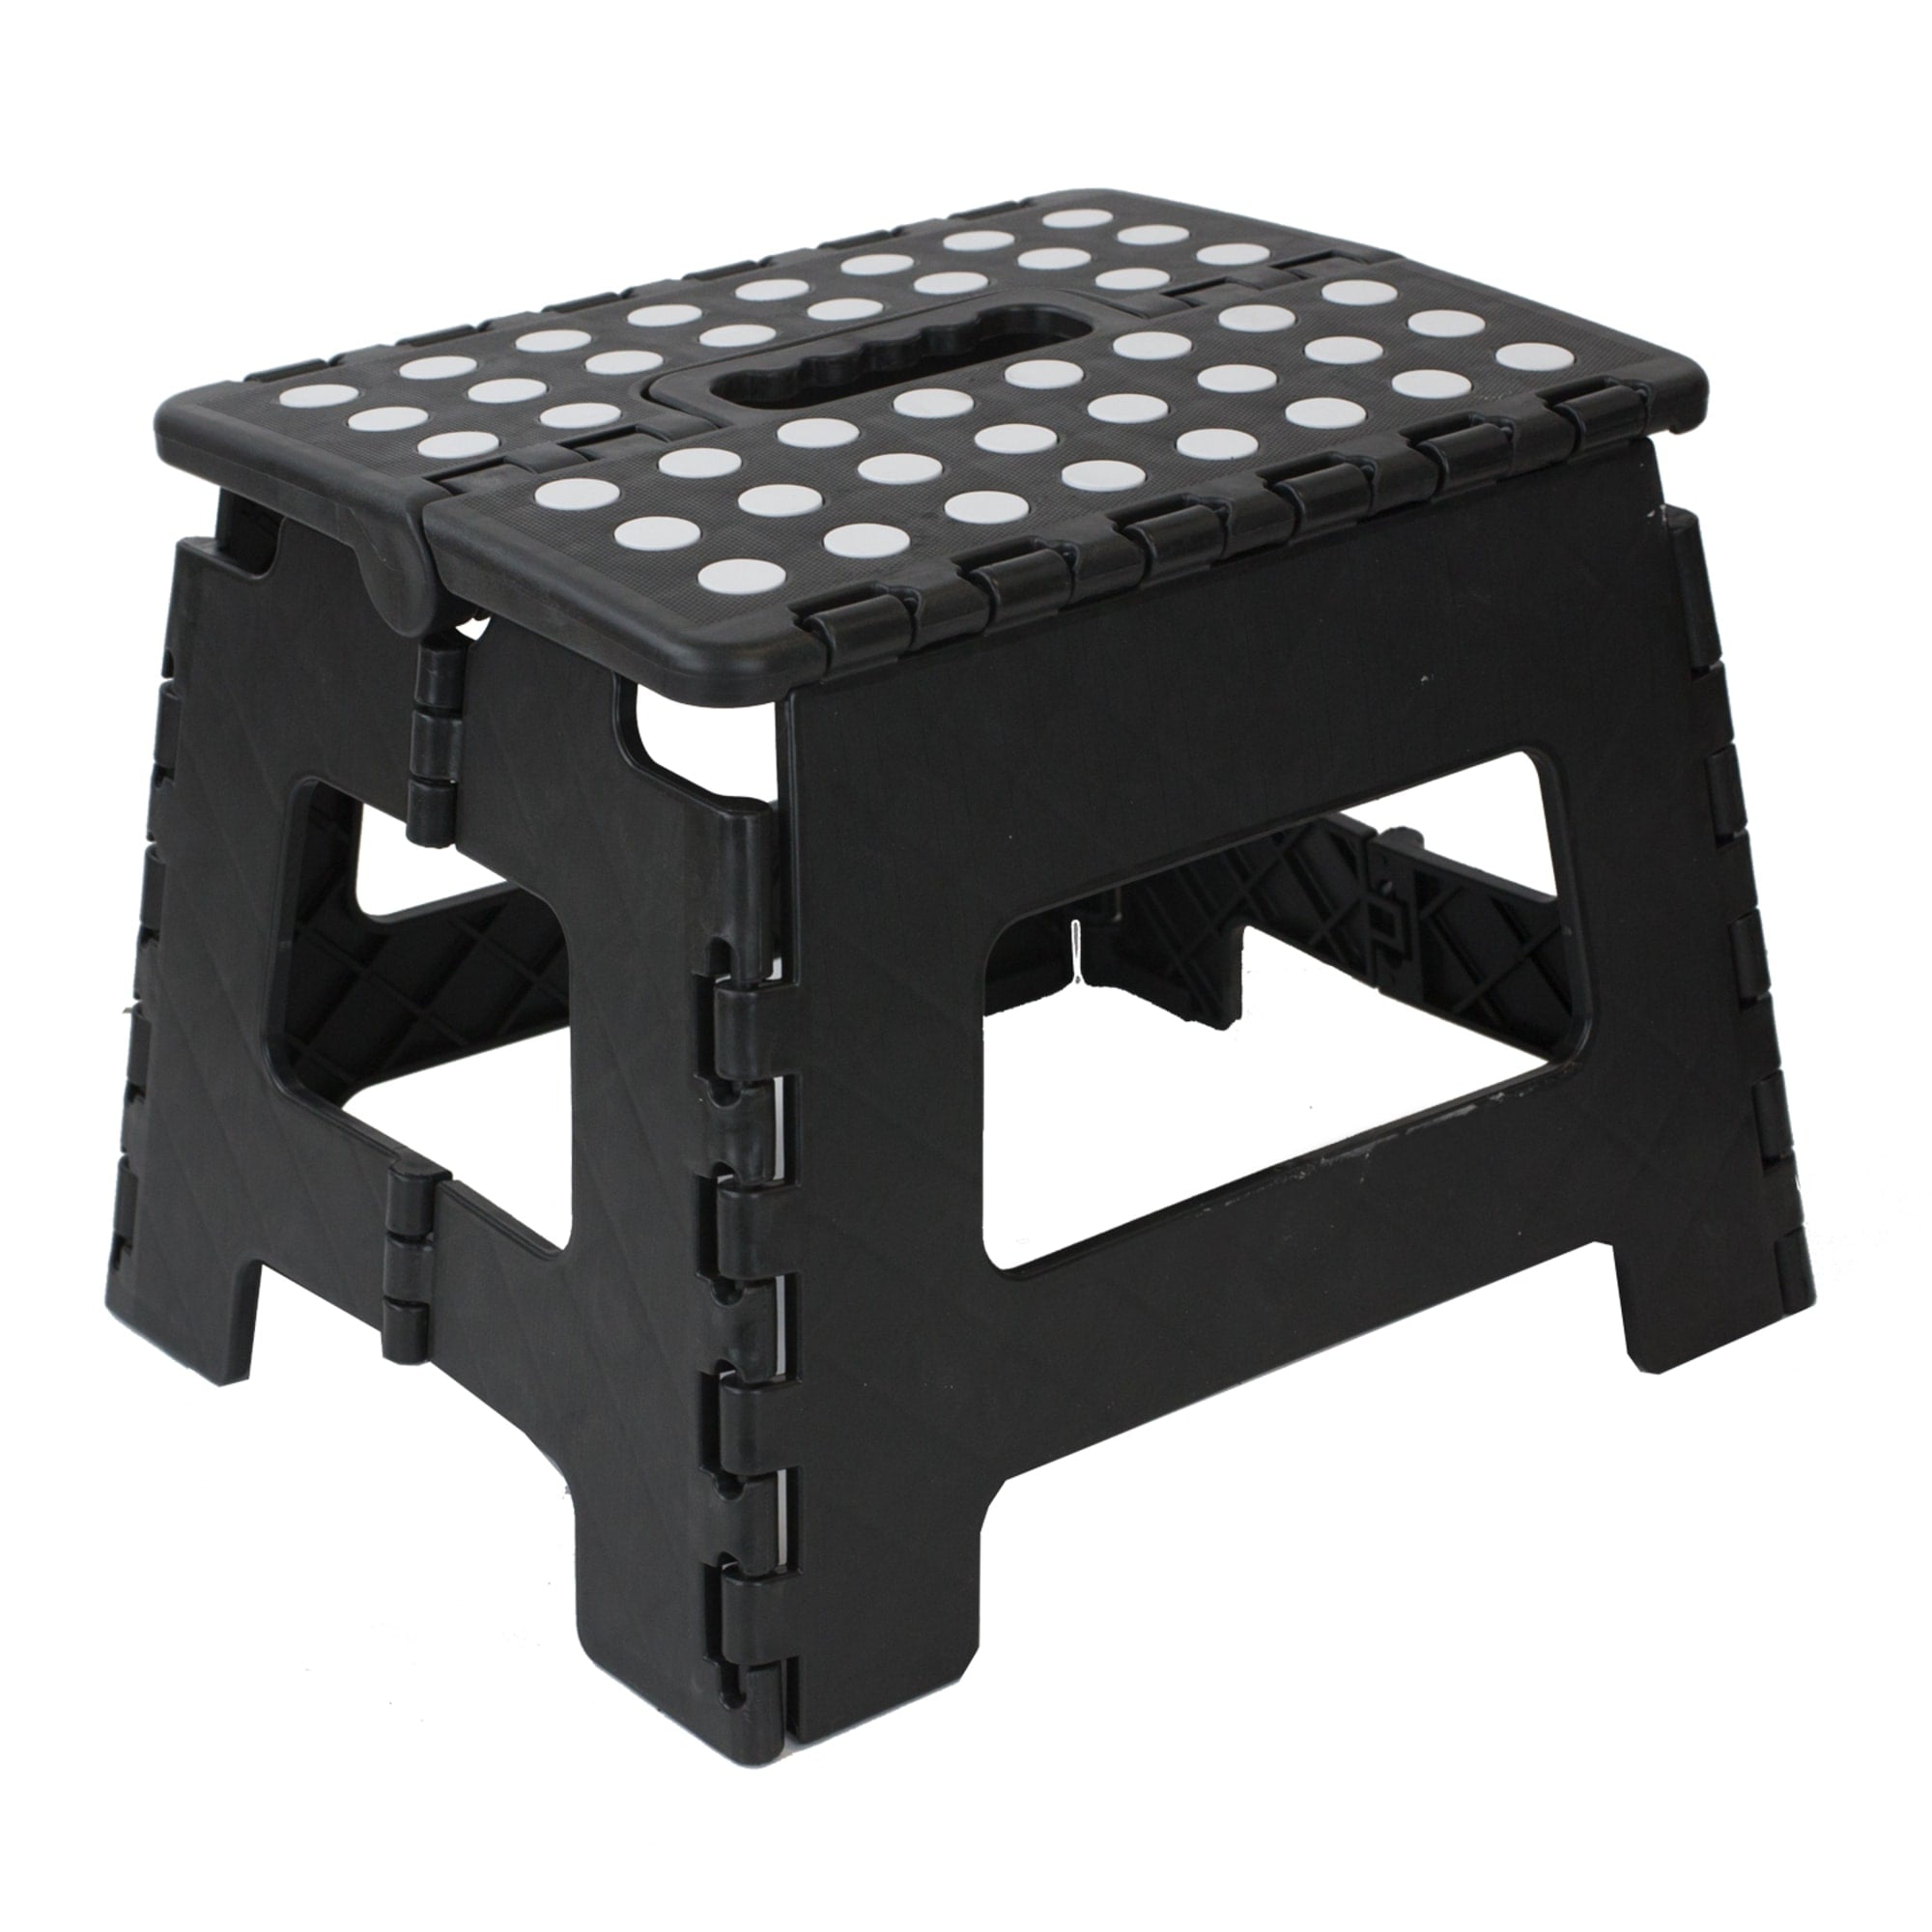 Home Basics Small Plastic Folding Stool with Non-Slip Dots $6.00 EACH, CASE PACK OF 12